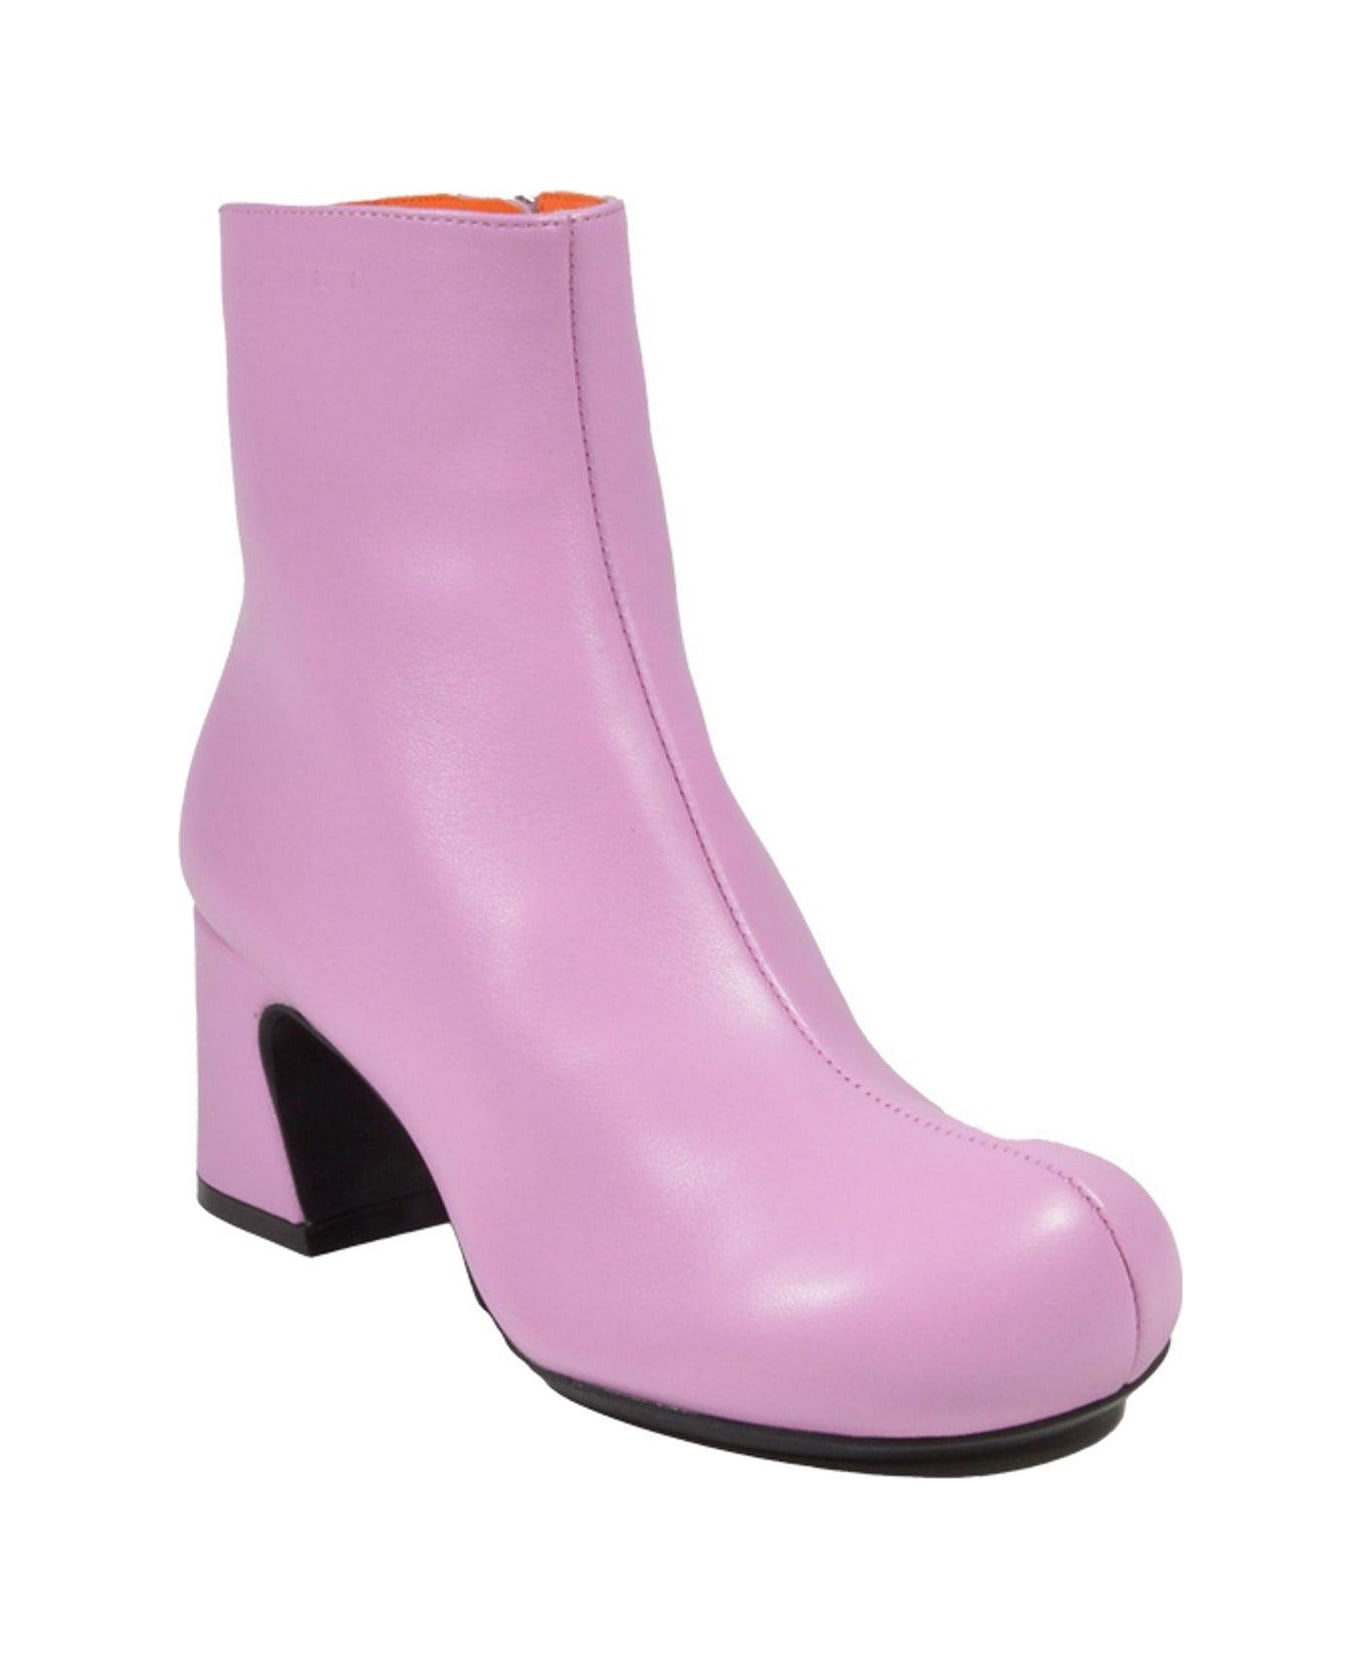 Marni Round Toe Zip-up Ankle Boots - PINK